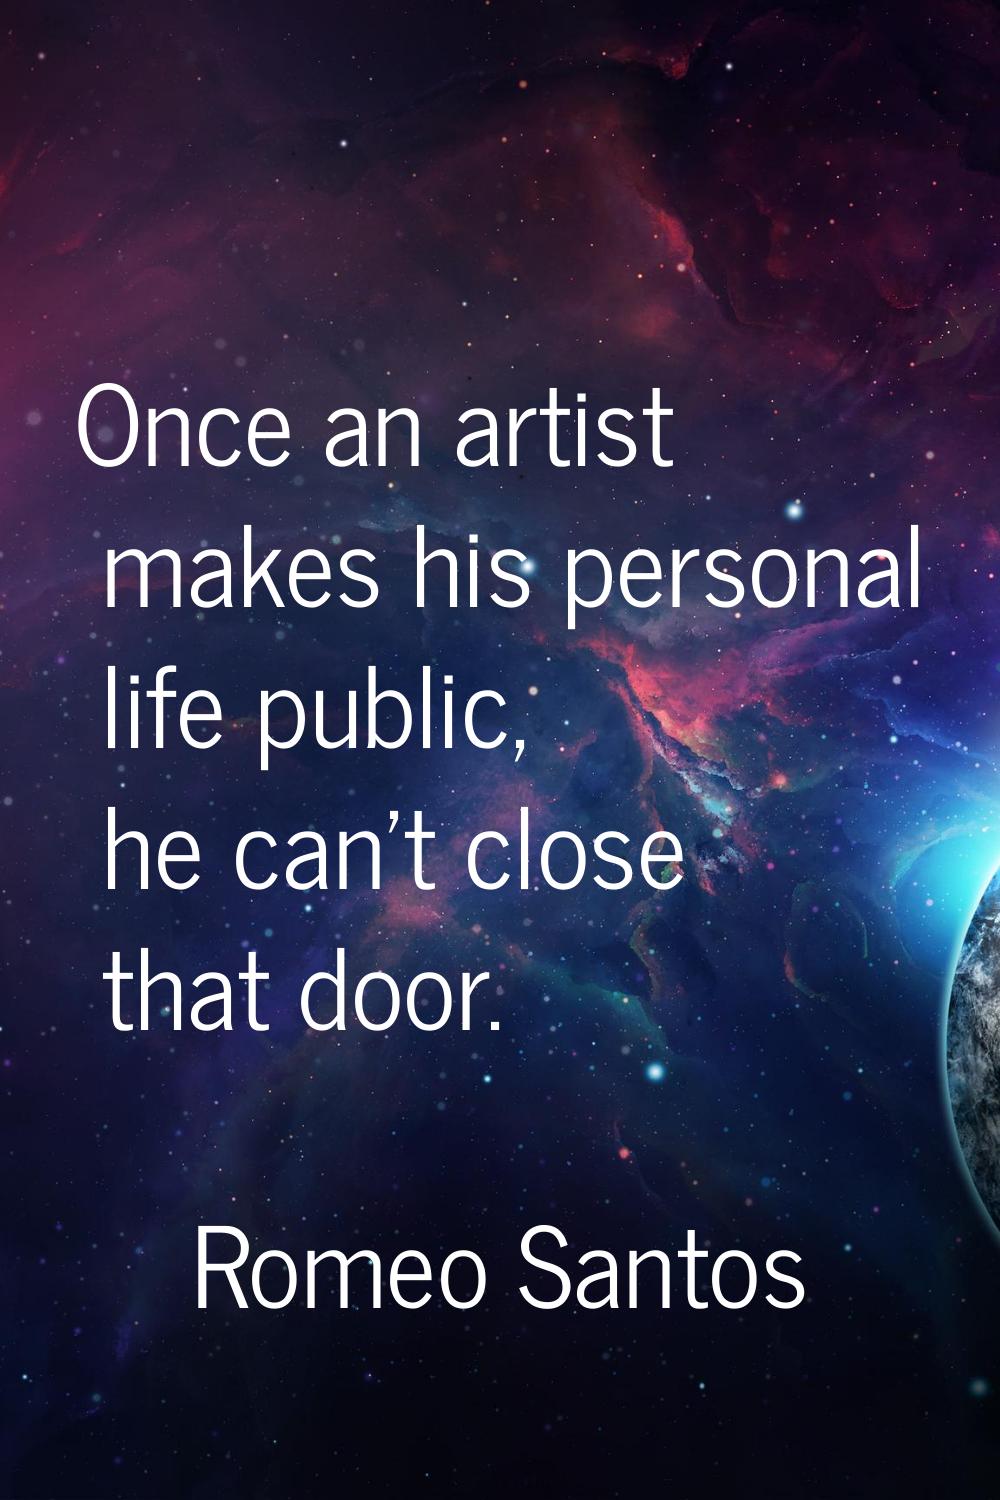 Once an artist makes his personal life public, he can't close that door.